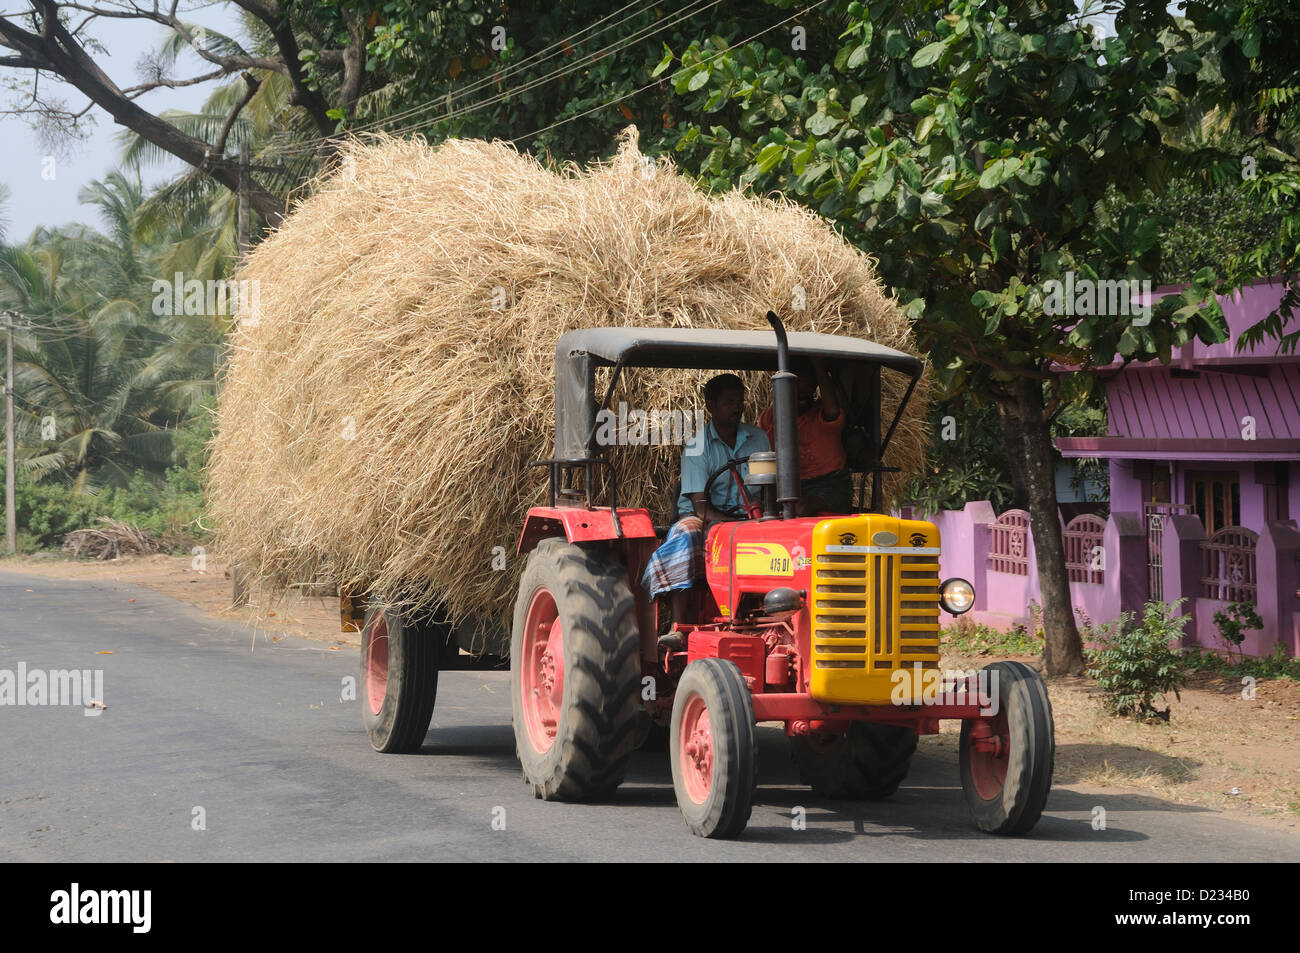 A Tractor with Fodder/Hay,  Erode, Tamil Nadu, India Stock Photo